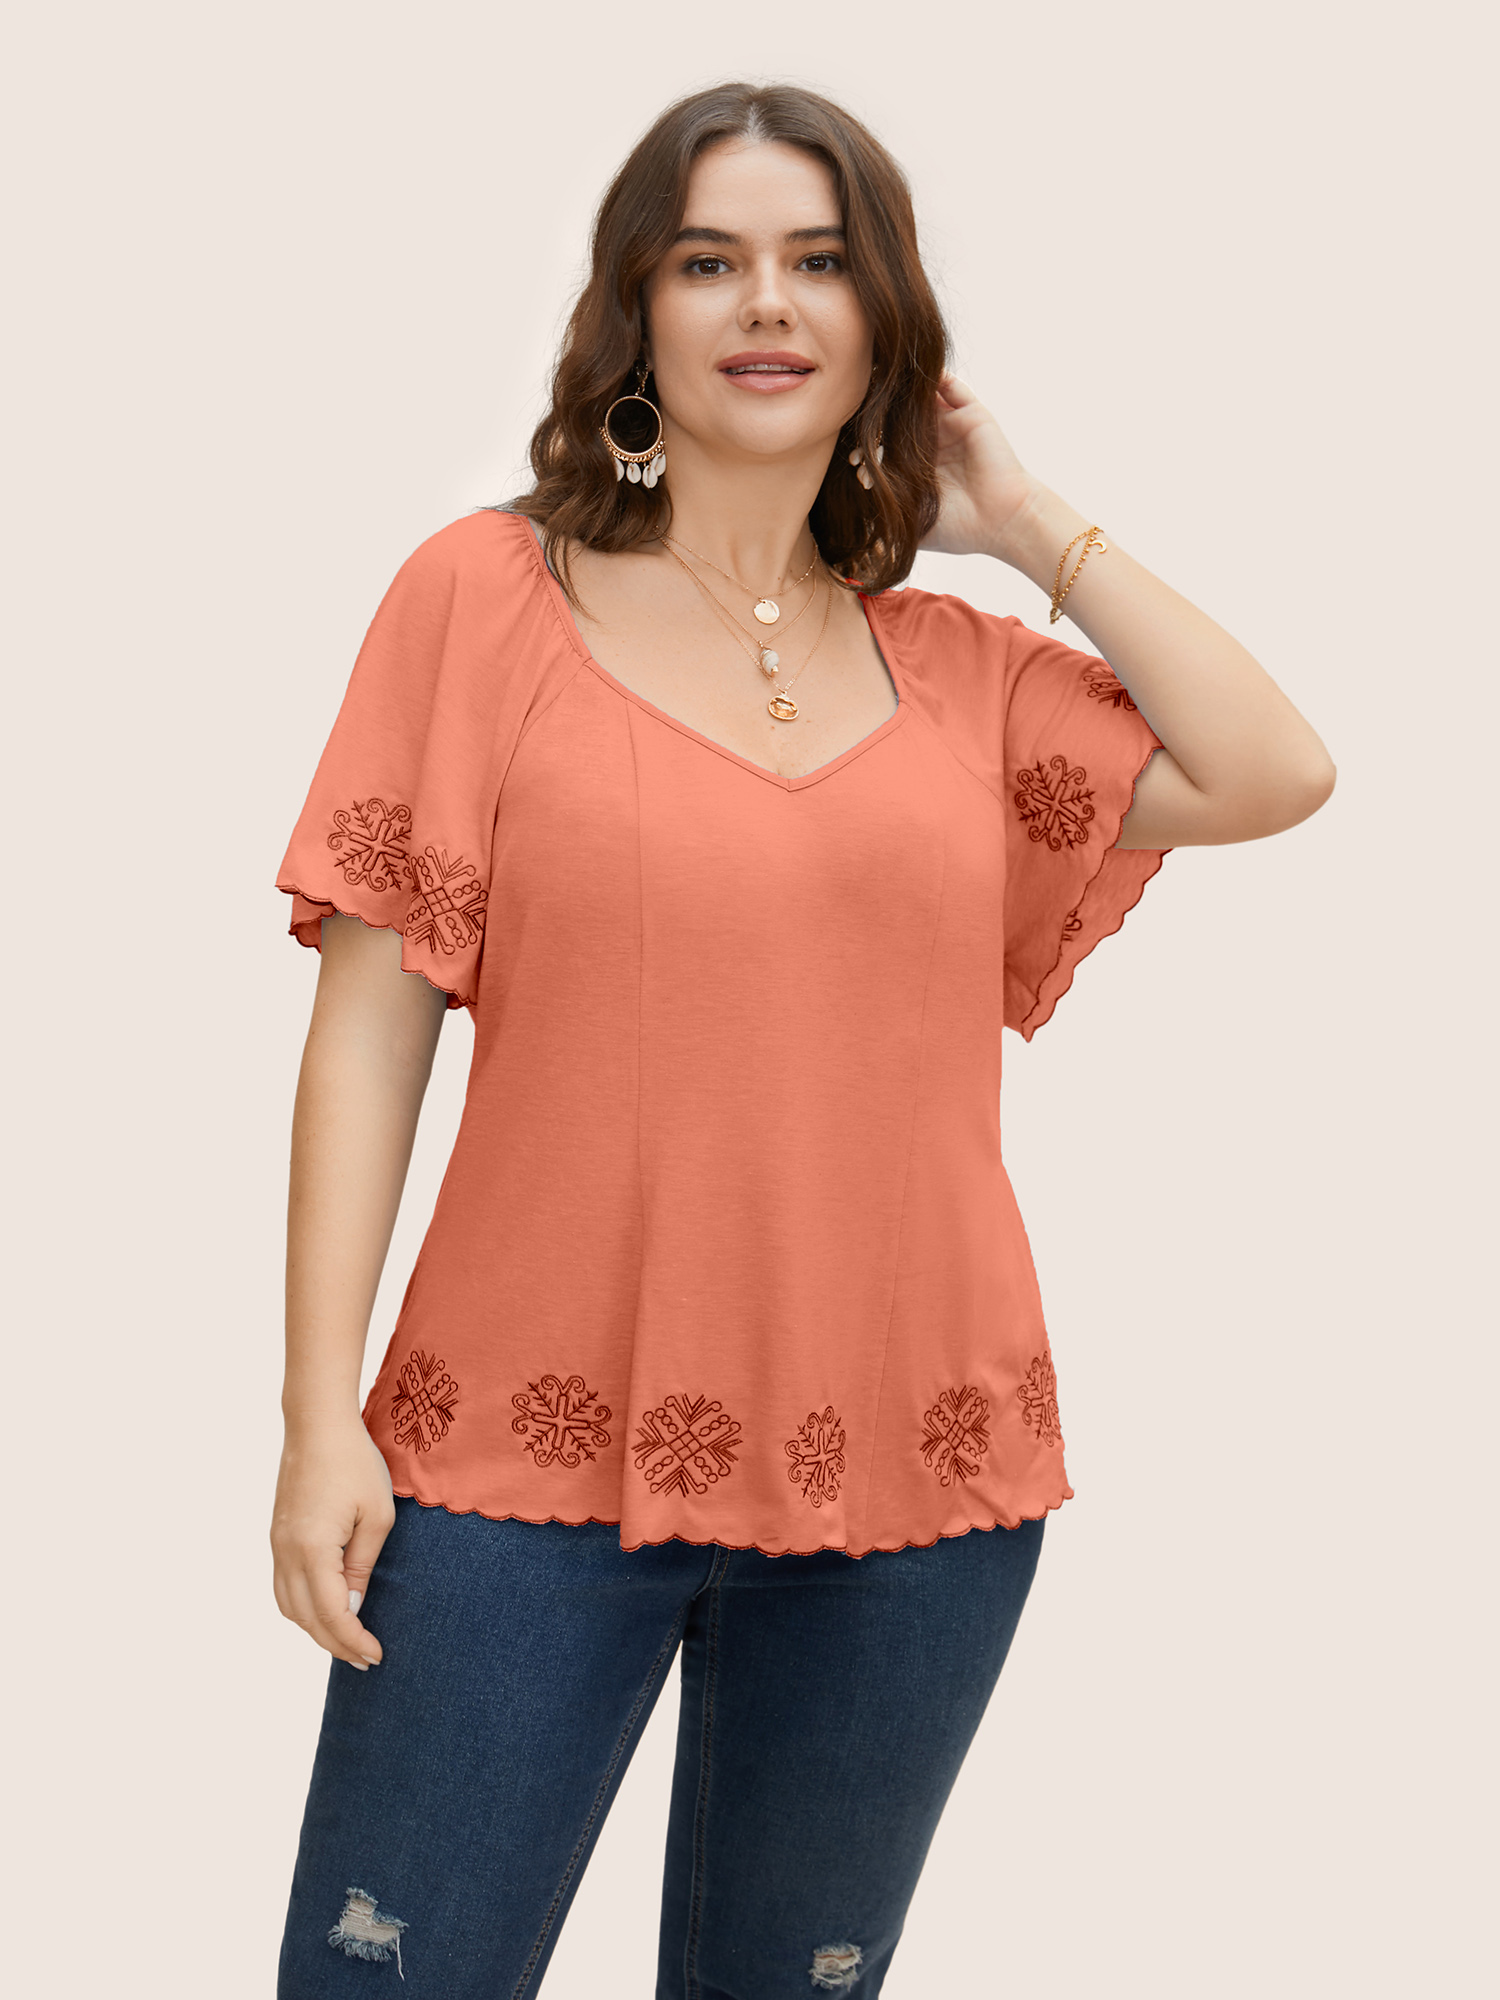 

Plus Size Bandana Floral Embroidered Ruffle Sleeve T-shirt Salmon Women Resort Embroidered Heart neckline Vacation T-shirts BloomChic